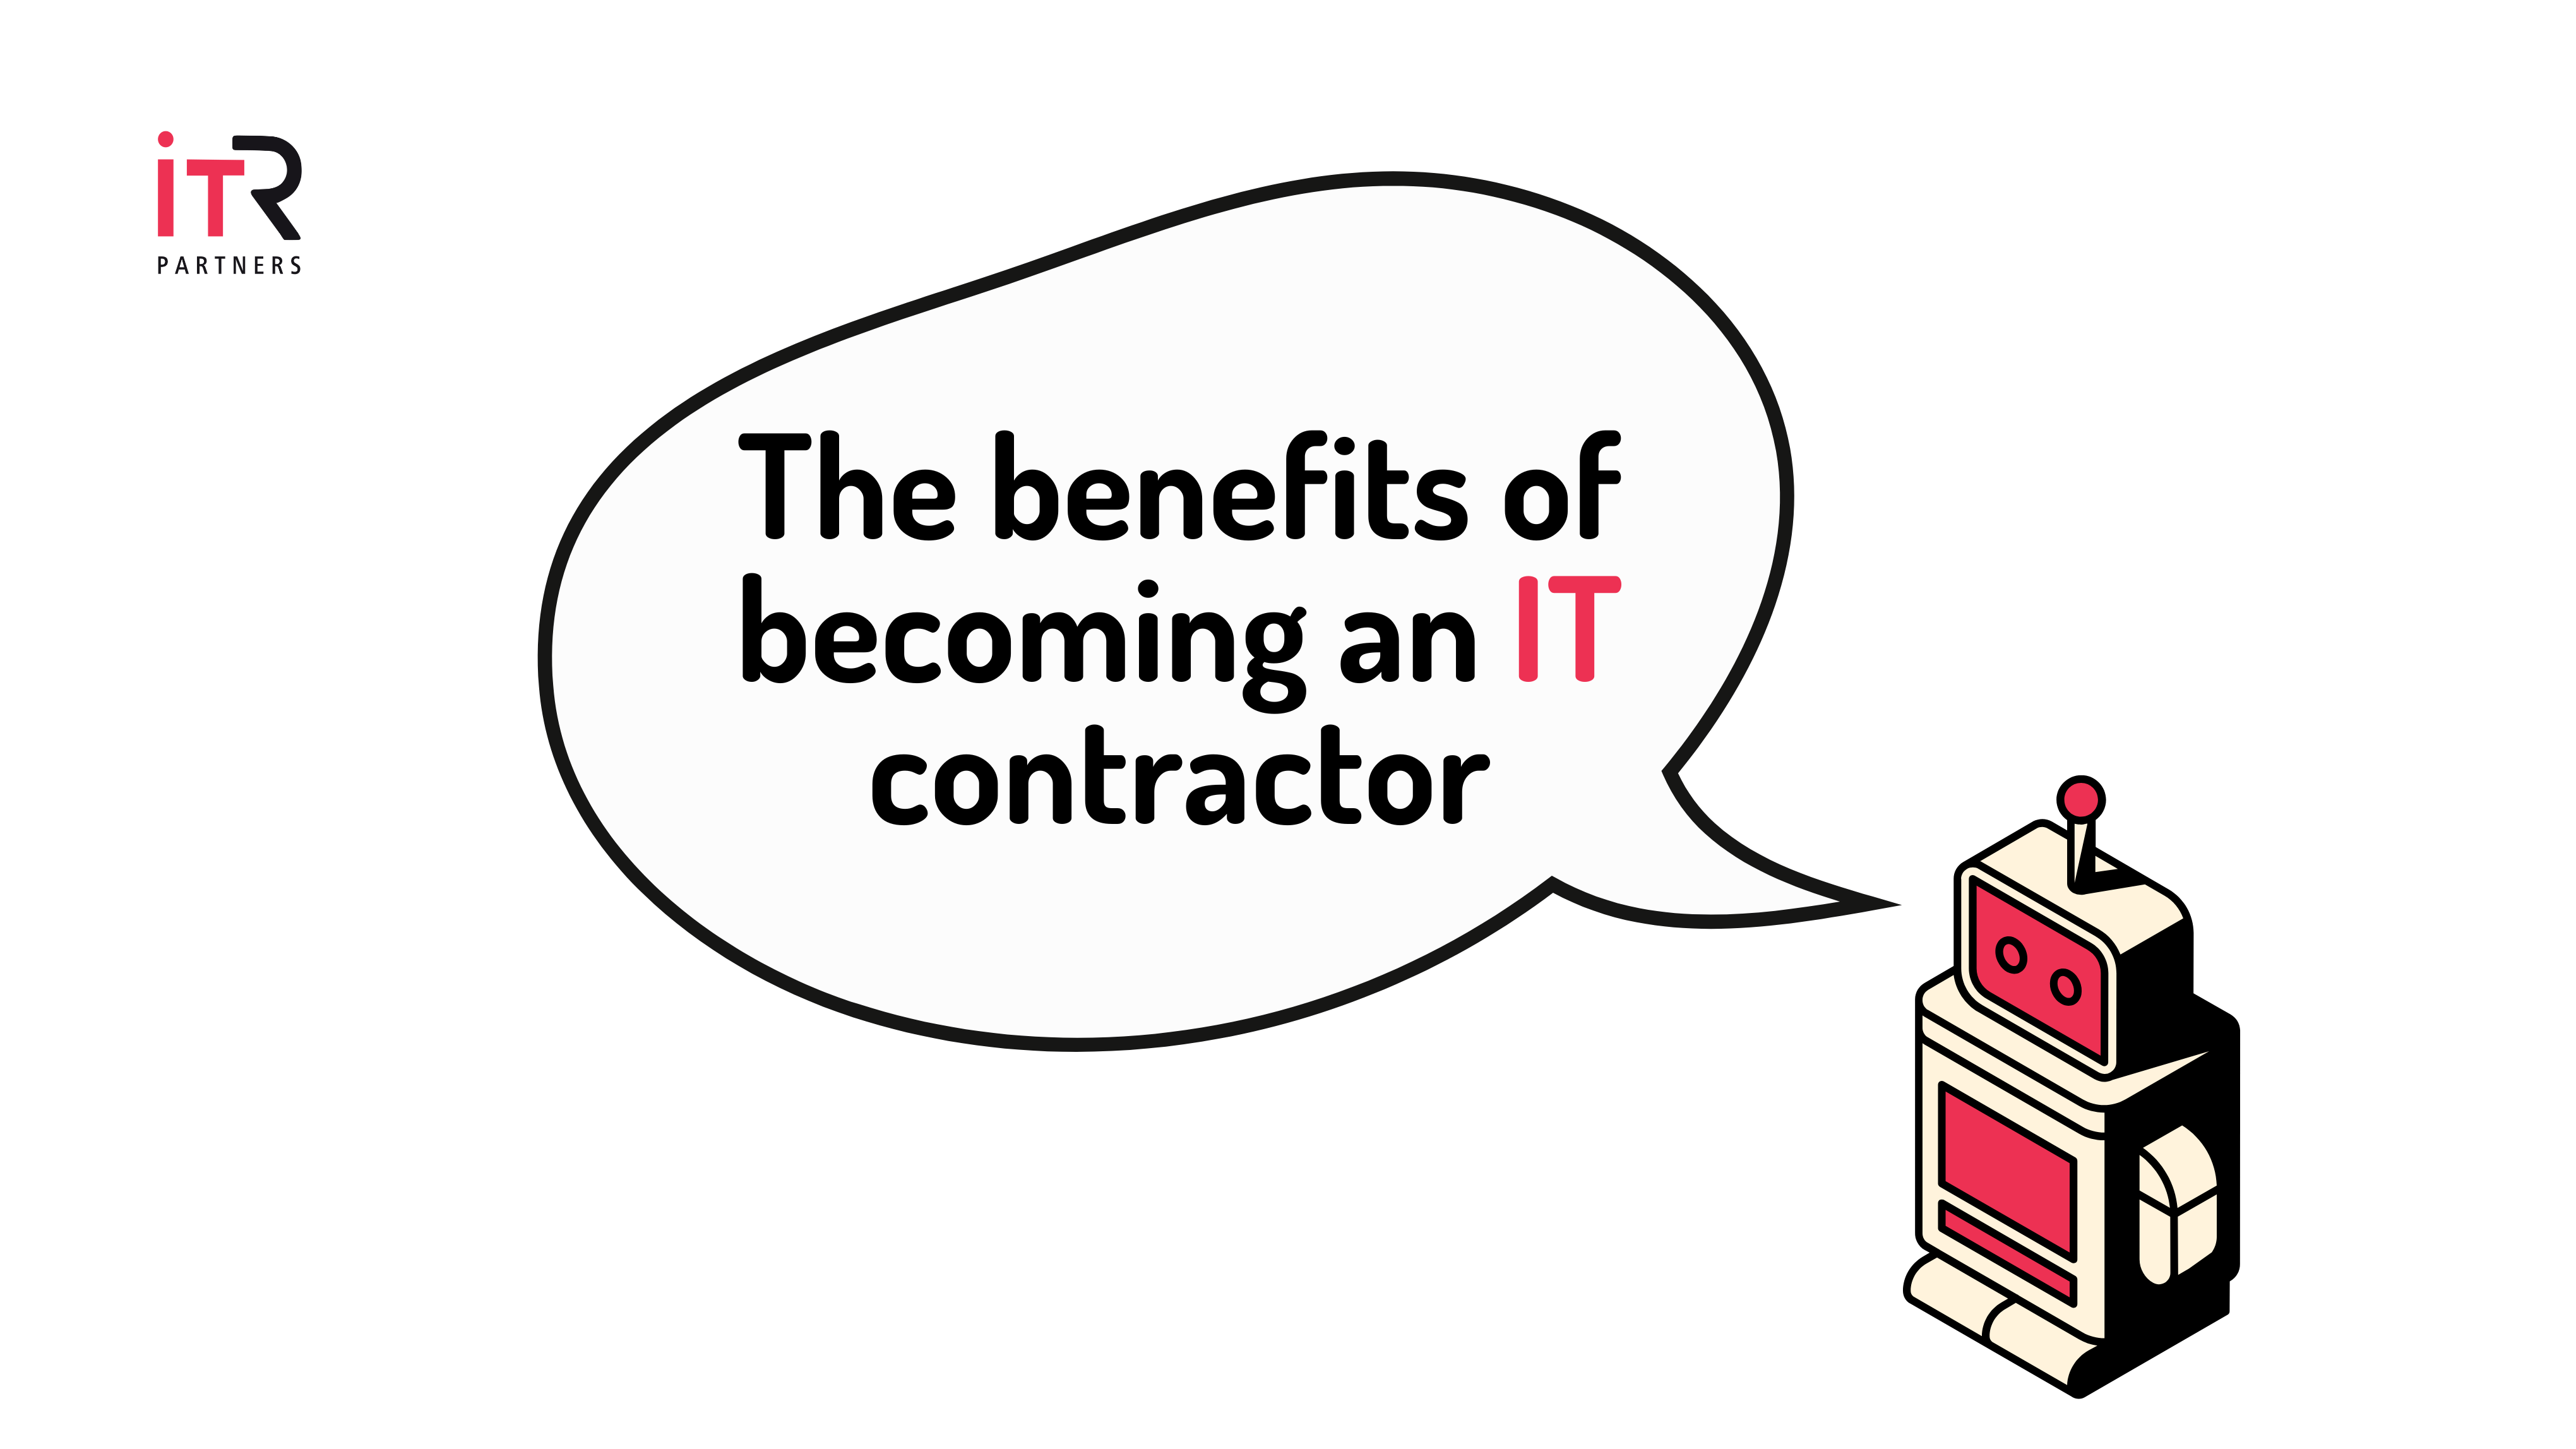 Benefits of an IT contractor